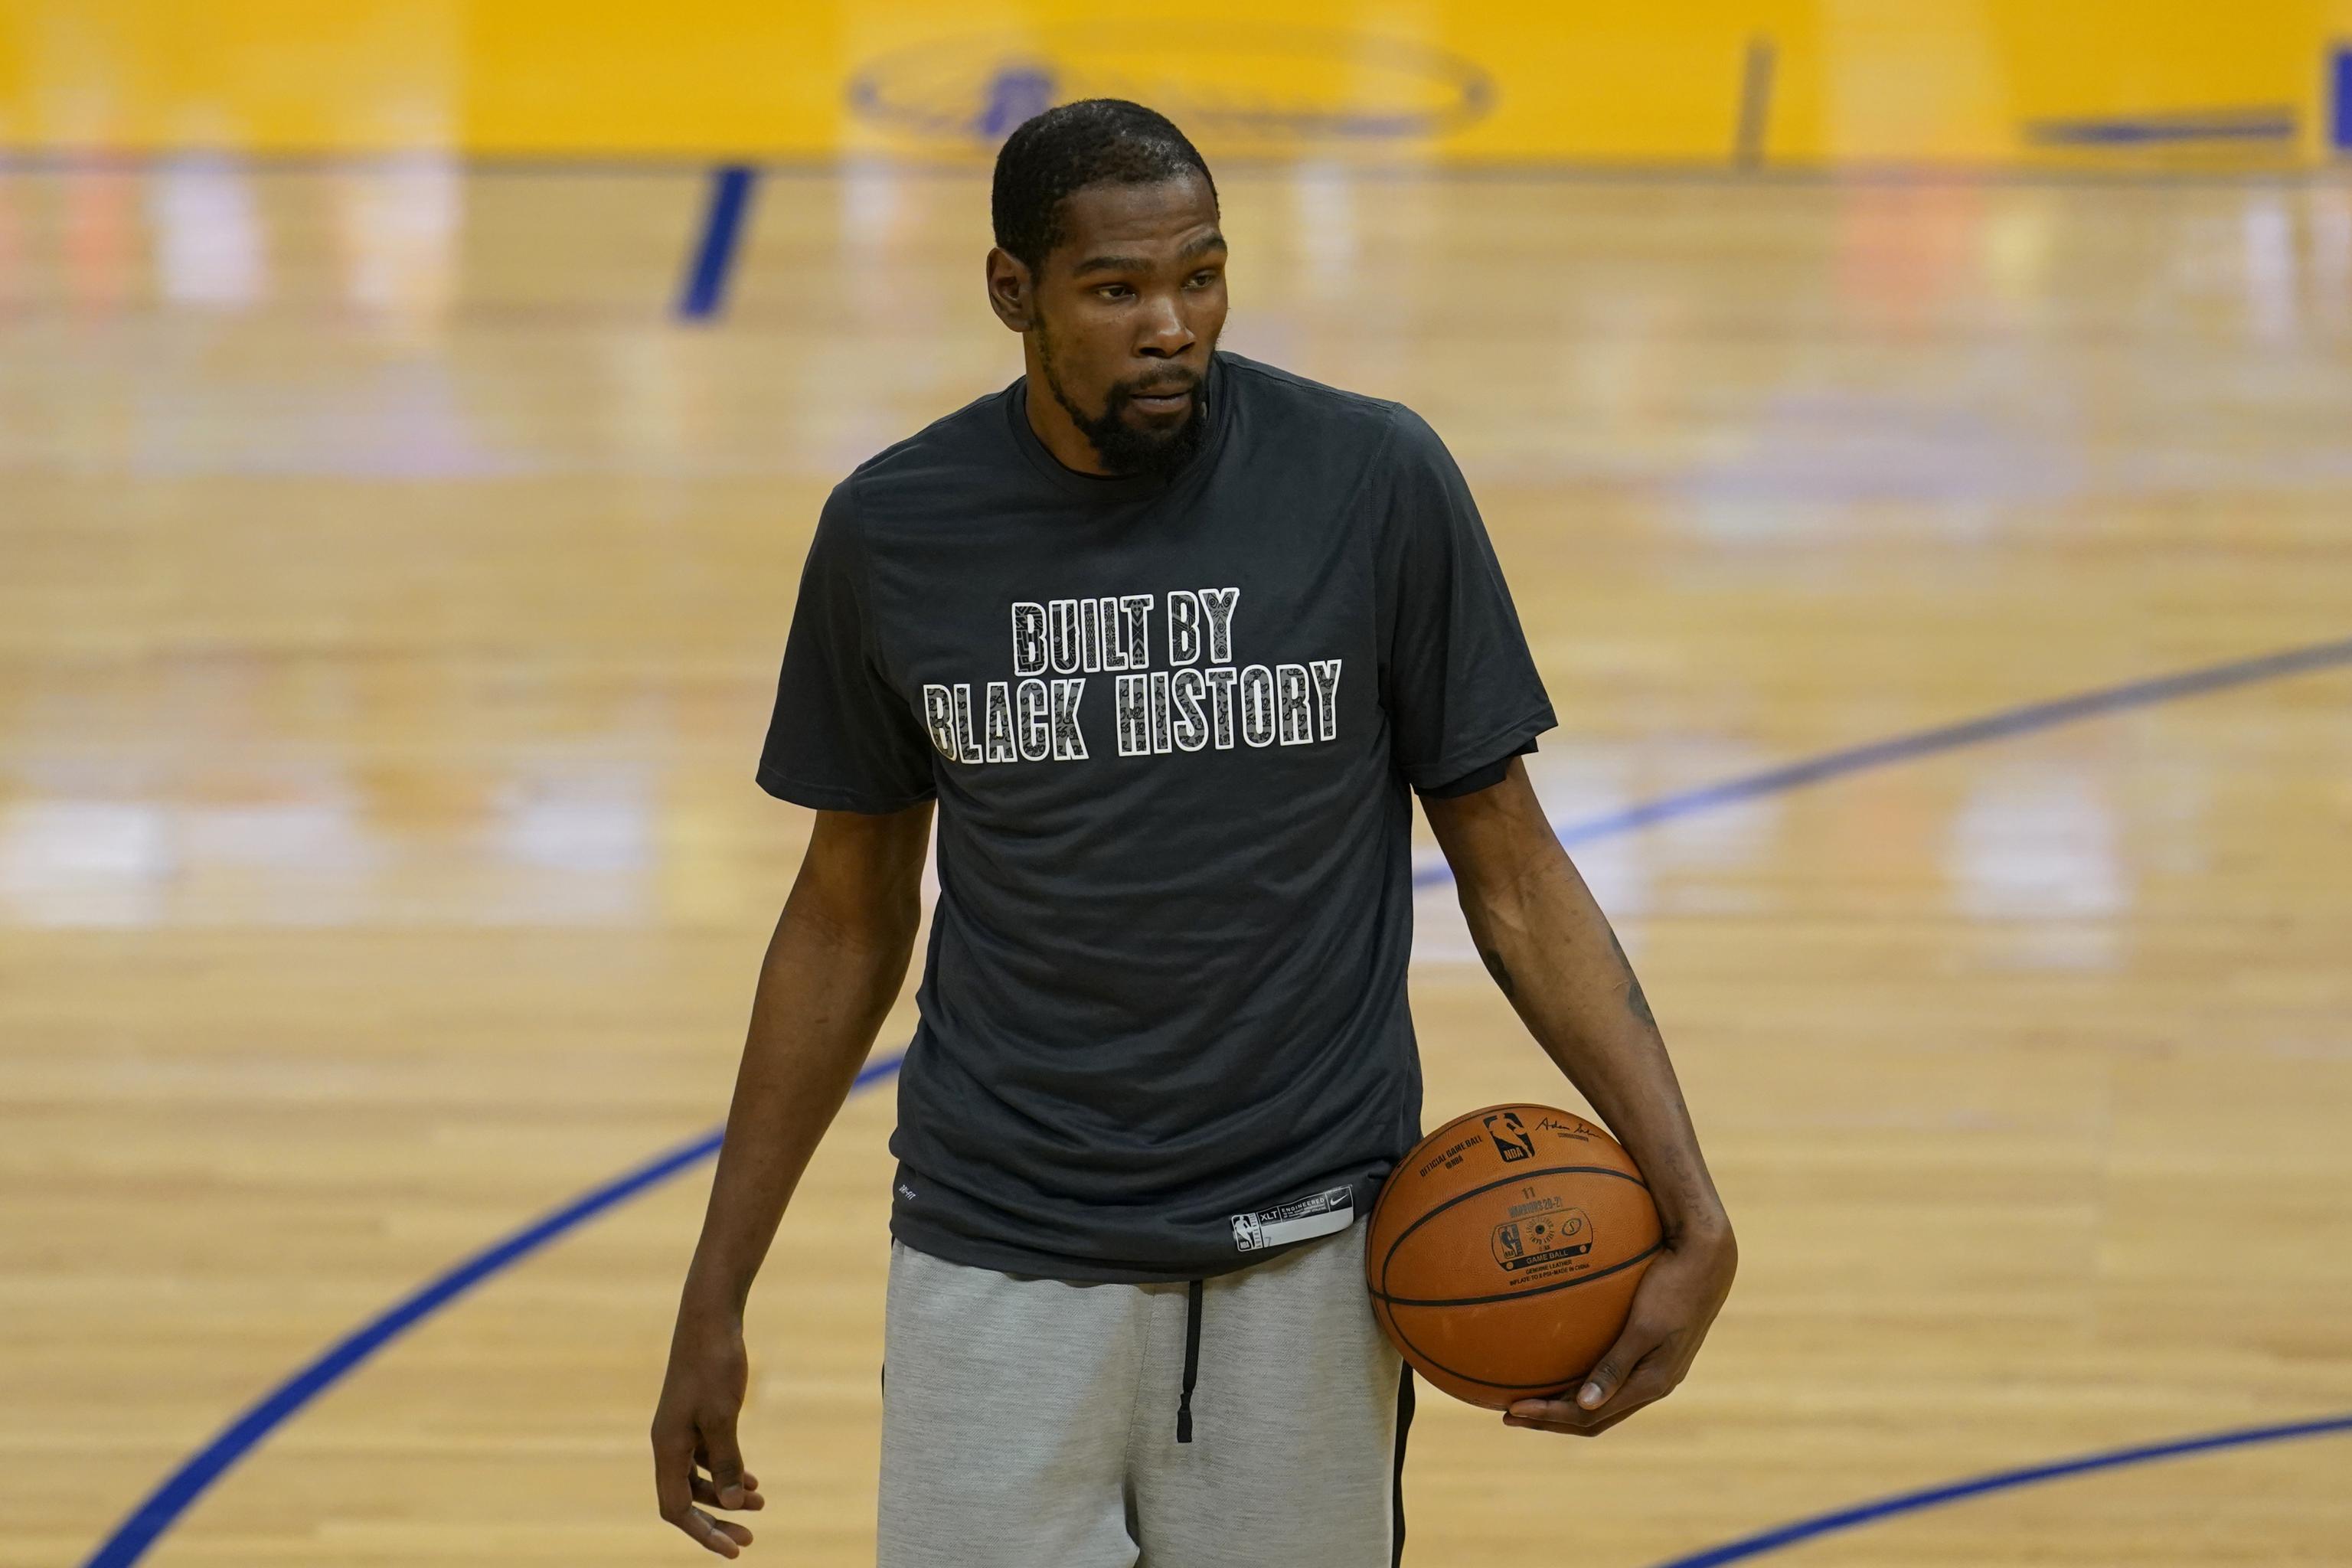 Kevin Durant Unlikely To Return To Nets This Week Amid Hamstring Injury Rehab Bleacher Report Latest News Videos And Highlights